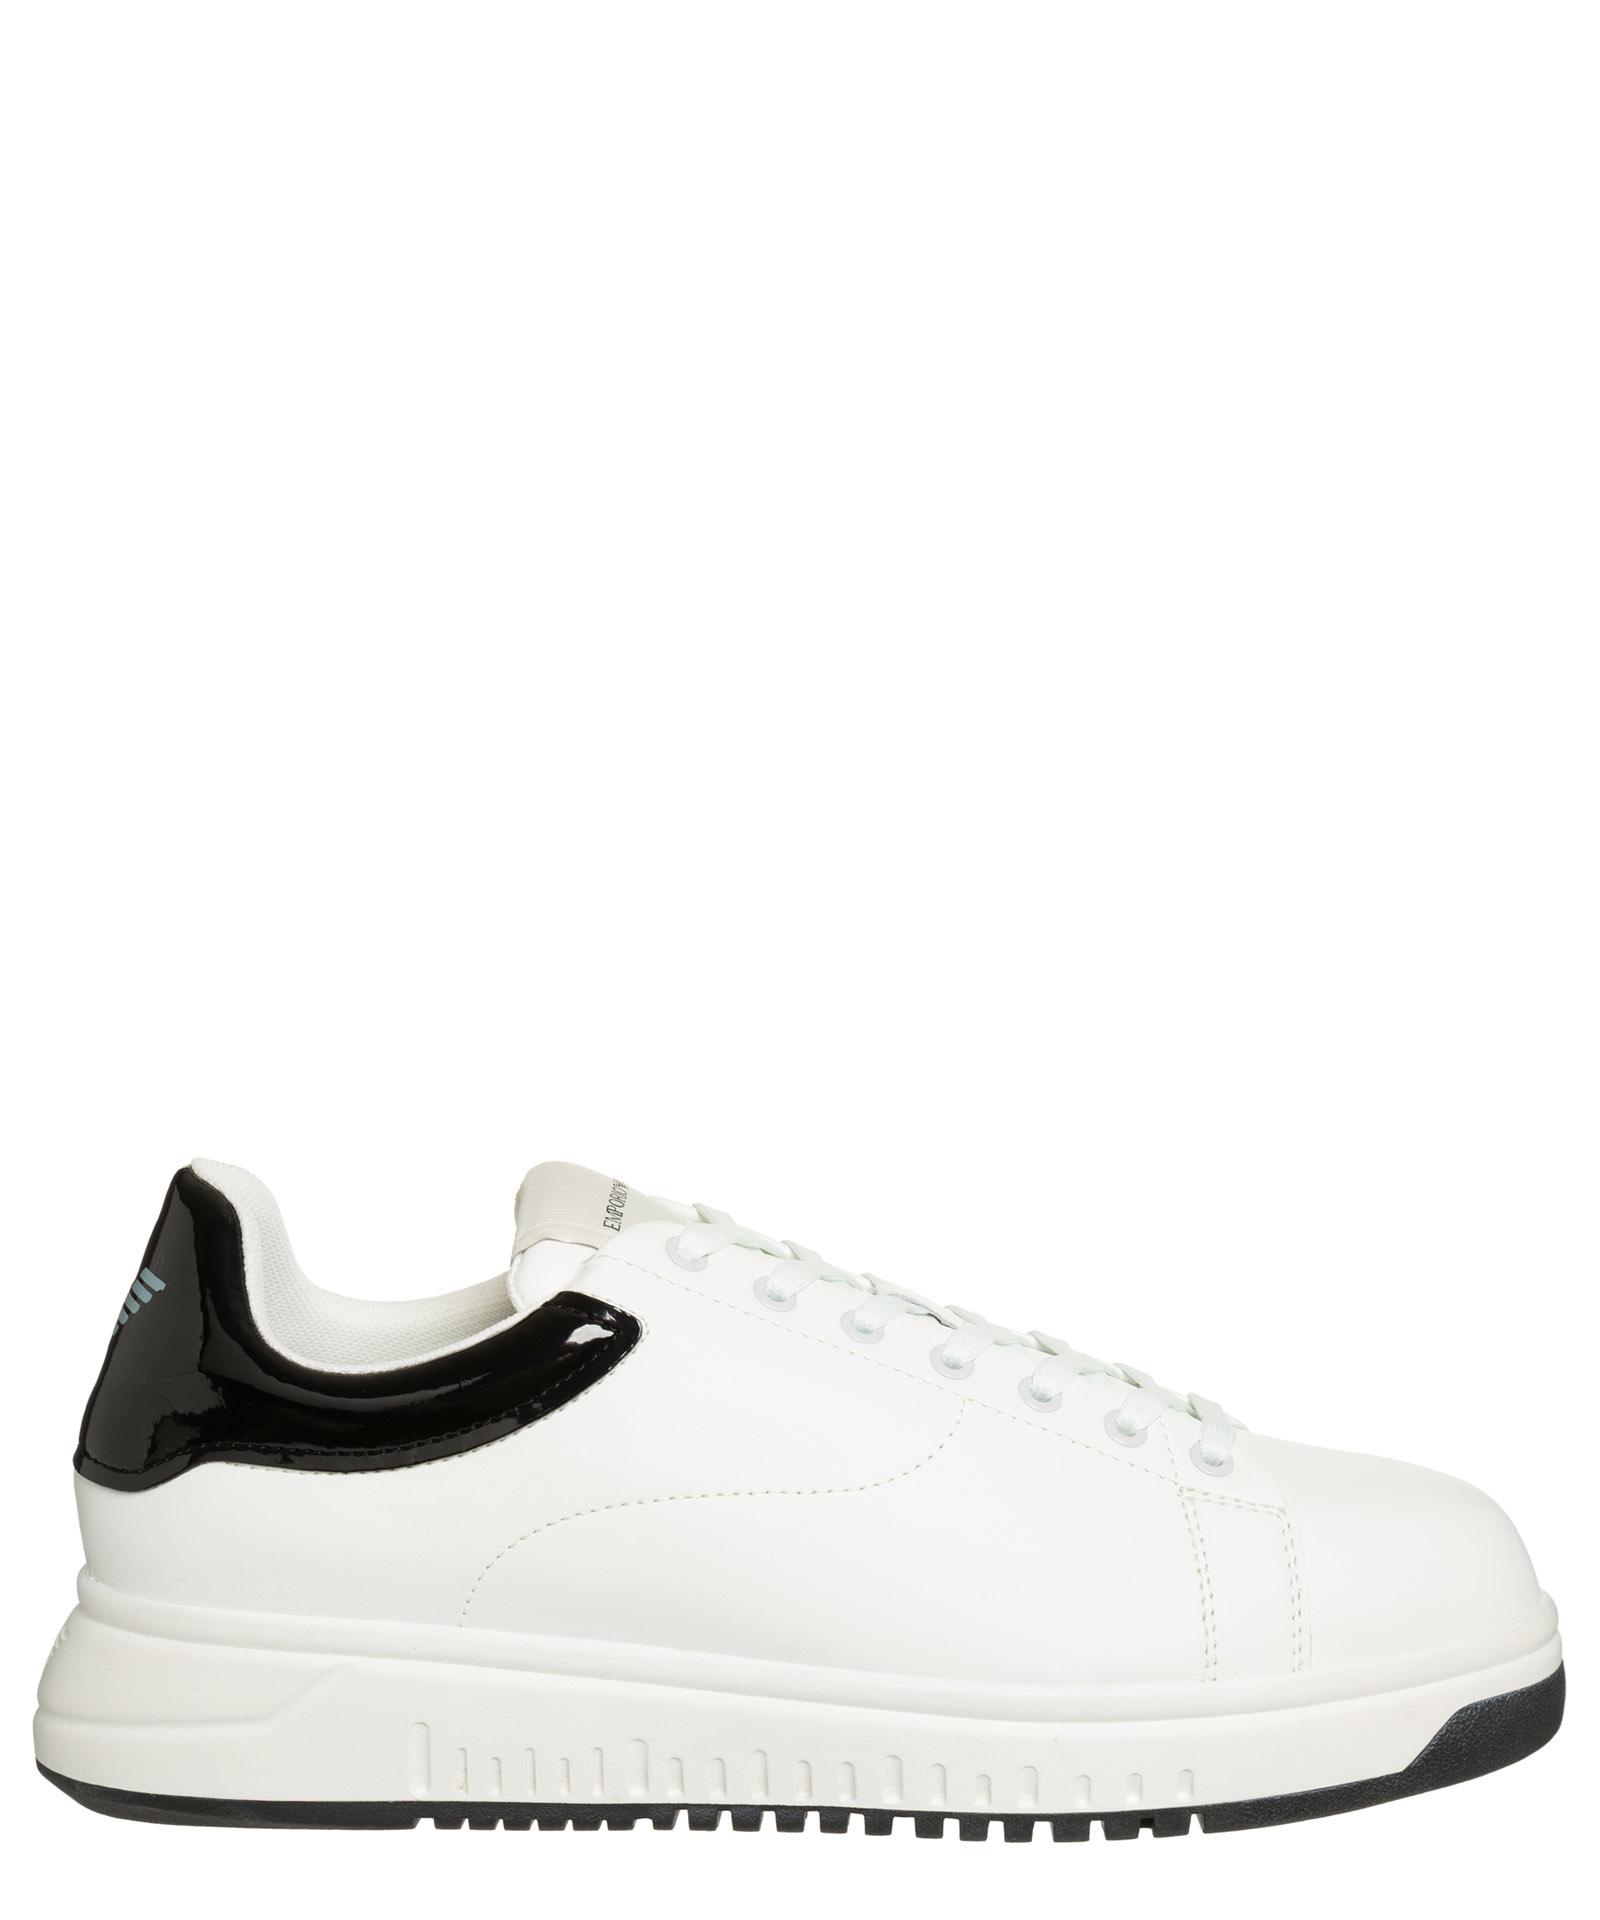 Emporio Armani Leather Sneakers in White for Men | Lyst